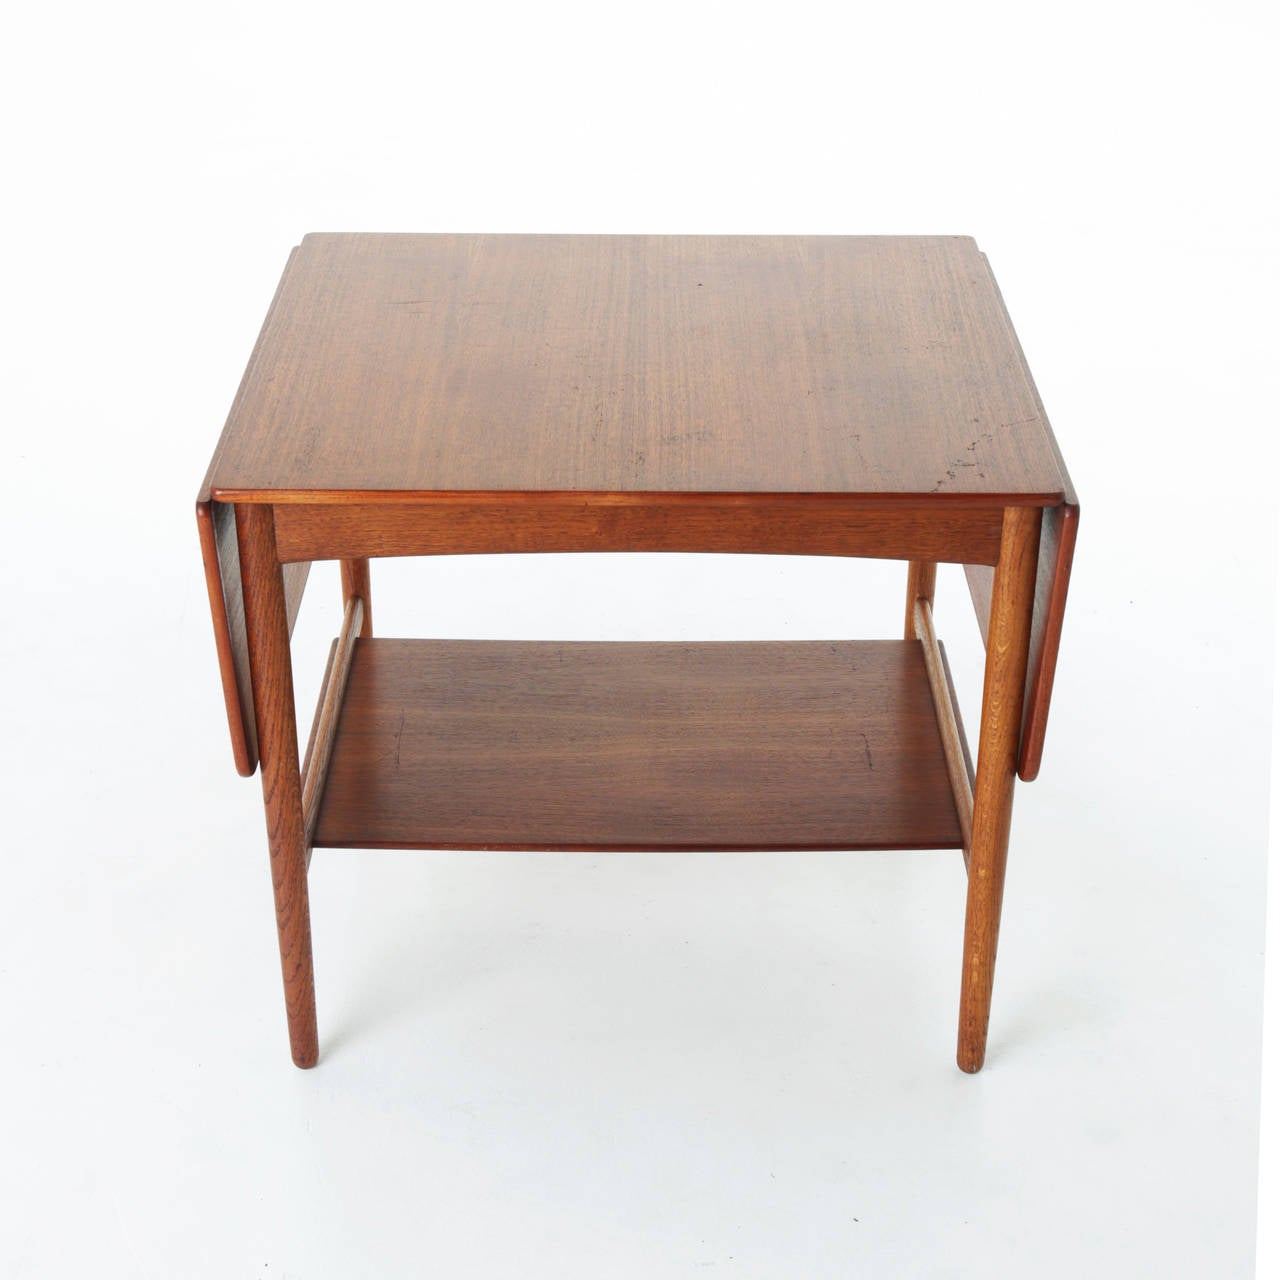 A lovely Danish teak side table with shelf and extendable sides. 
Measures:
With extensions up:
Width: 47.5 inches.
Depth: 23.5 inches.
Height: 24 inches.

Many pieces are stored in our warehouse, so please click on Contact Dealer under our